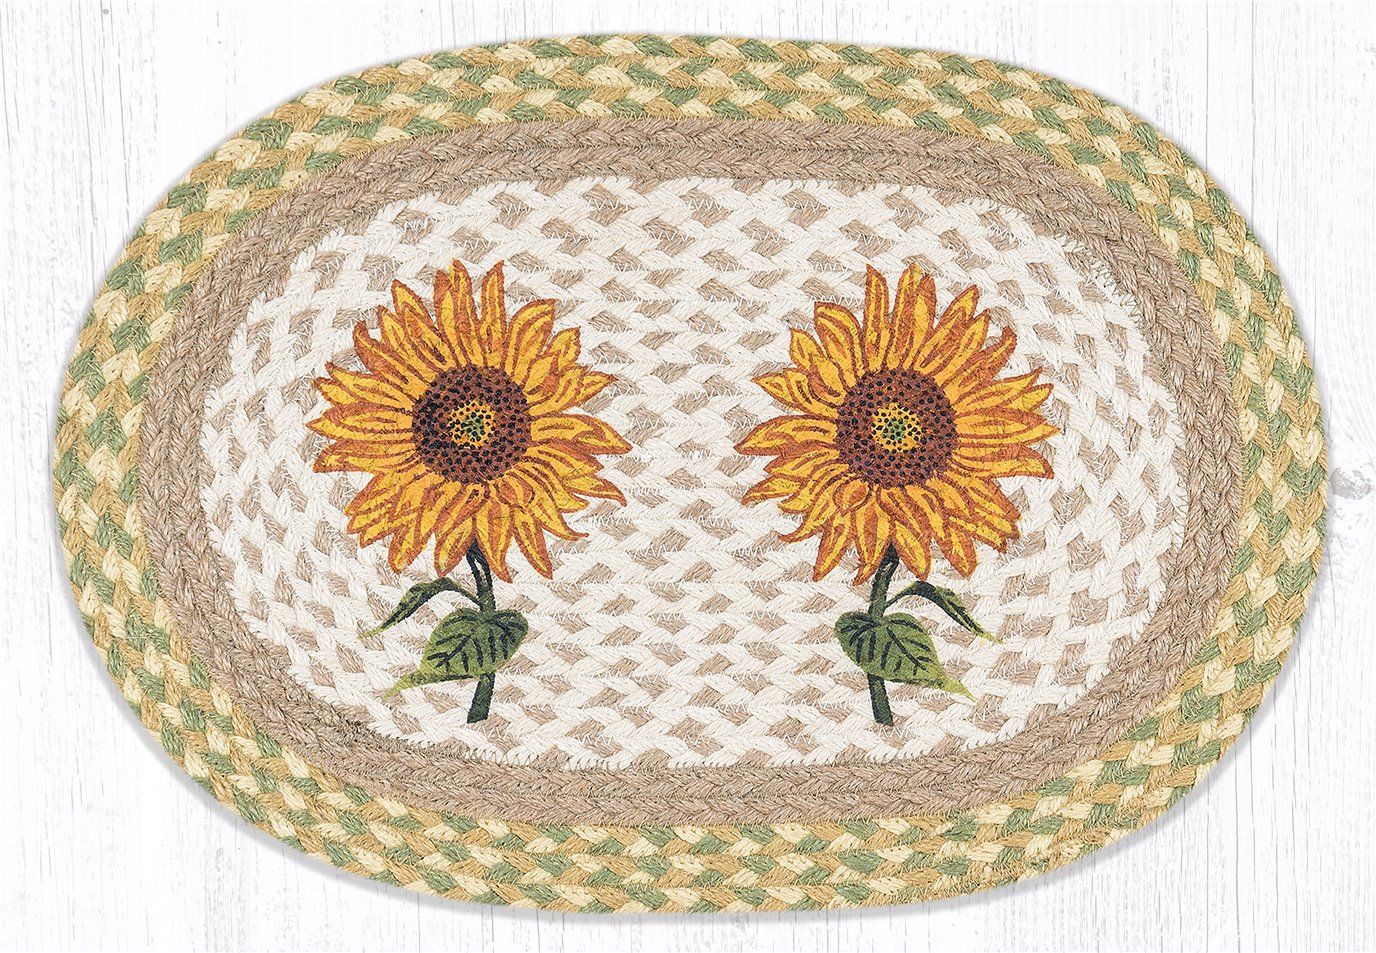 Sunflowers Oval Braided Placemat 13"x19"